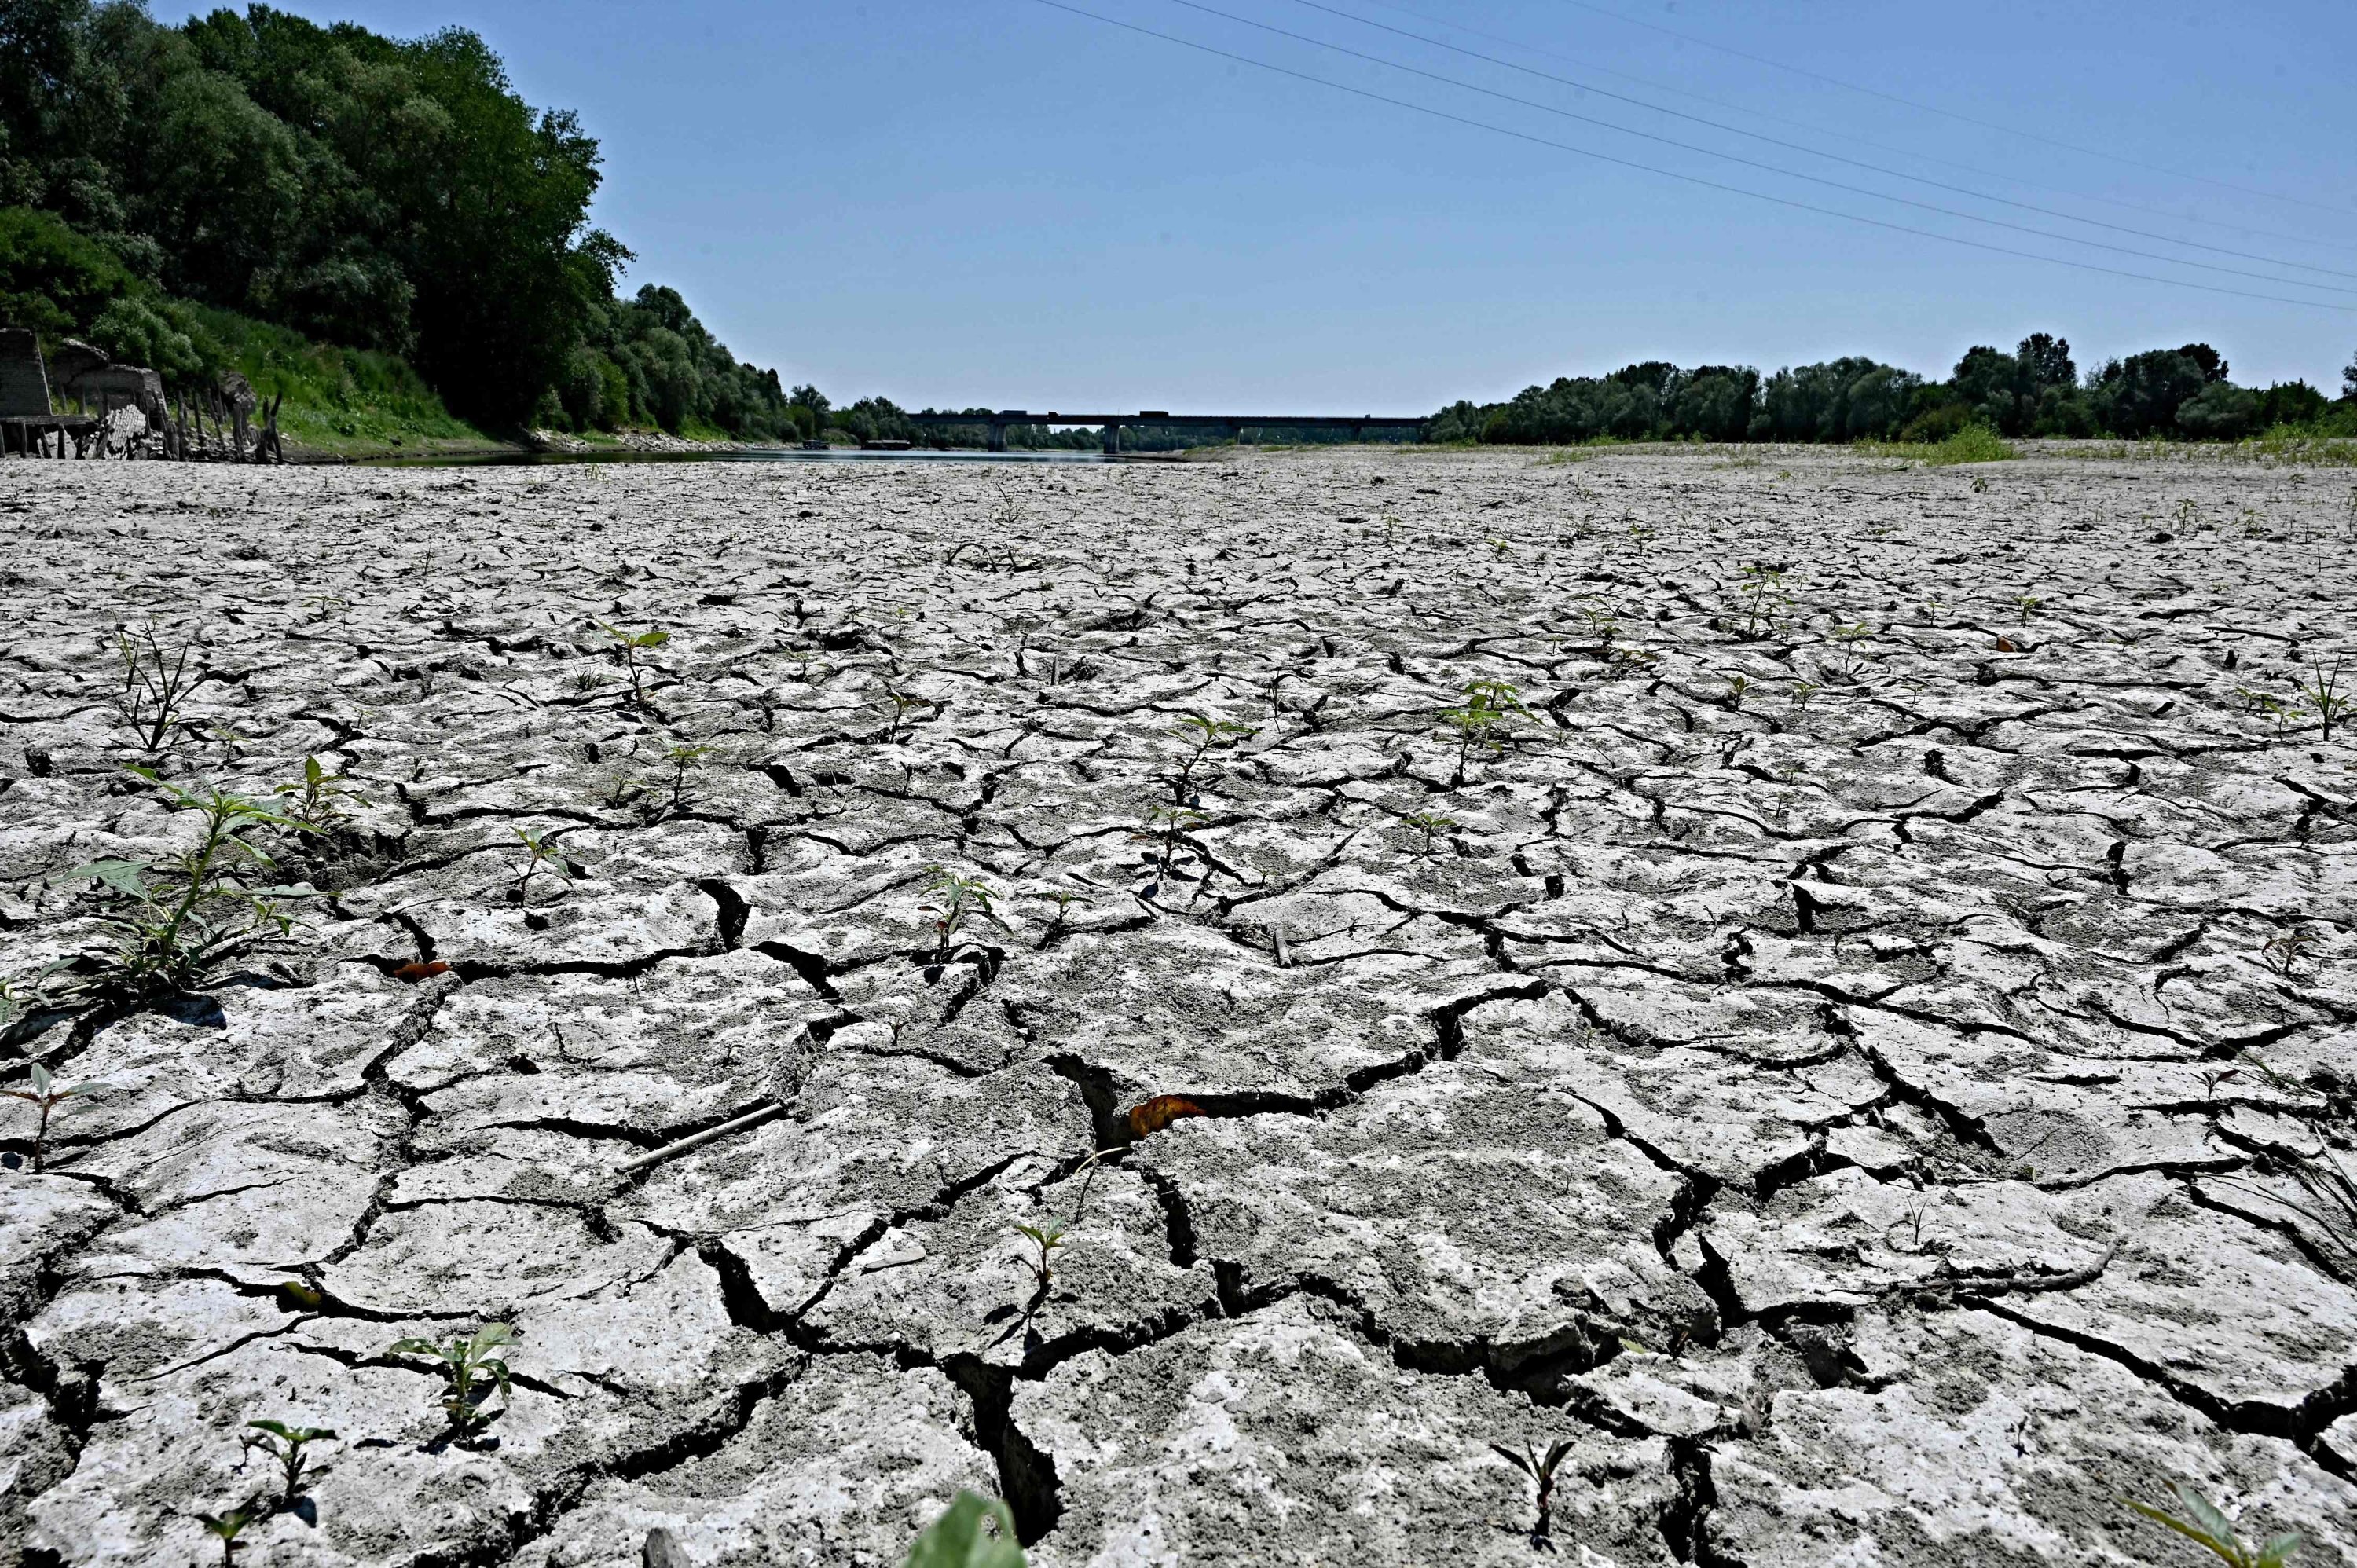 The dried-up river bed of the Po river, in the area of the municipality of Occhiobello, in the region of Veneto, Italy, July 5, 2022. (AFP Photo)